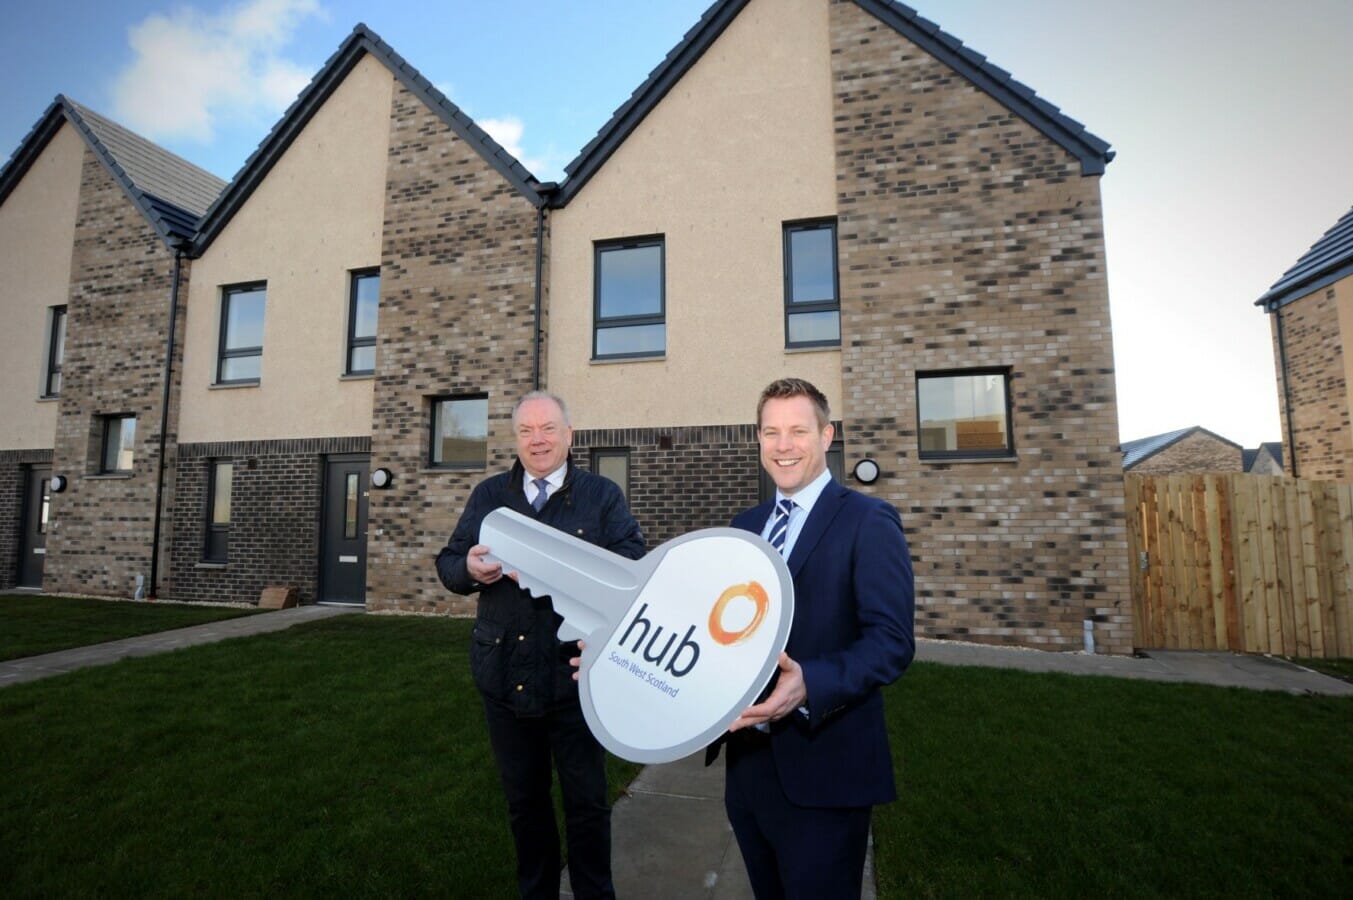 hub South West completes its 500th home as itbuilds on its successes as a preferreddevelopment partner